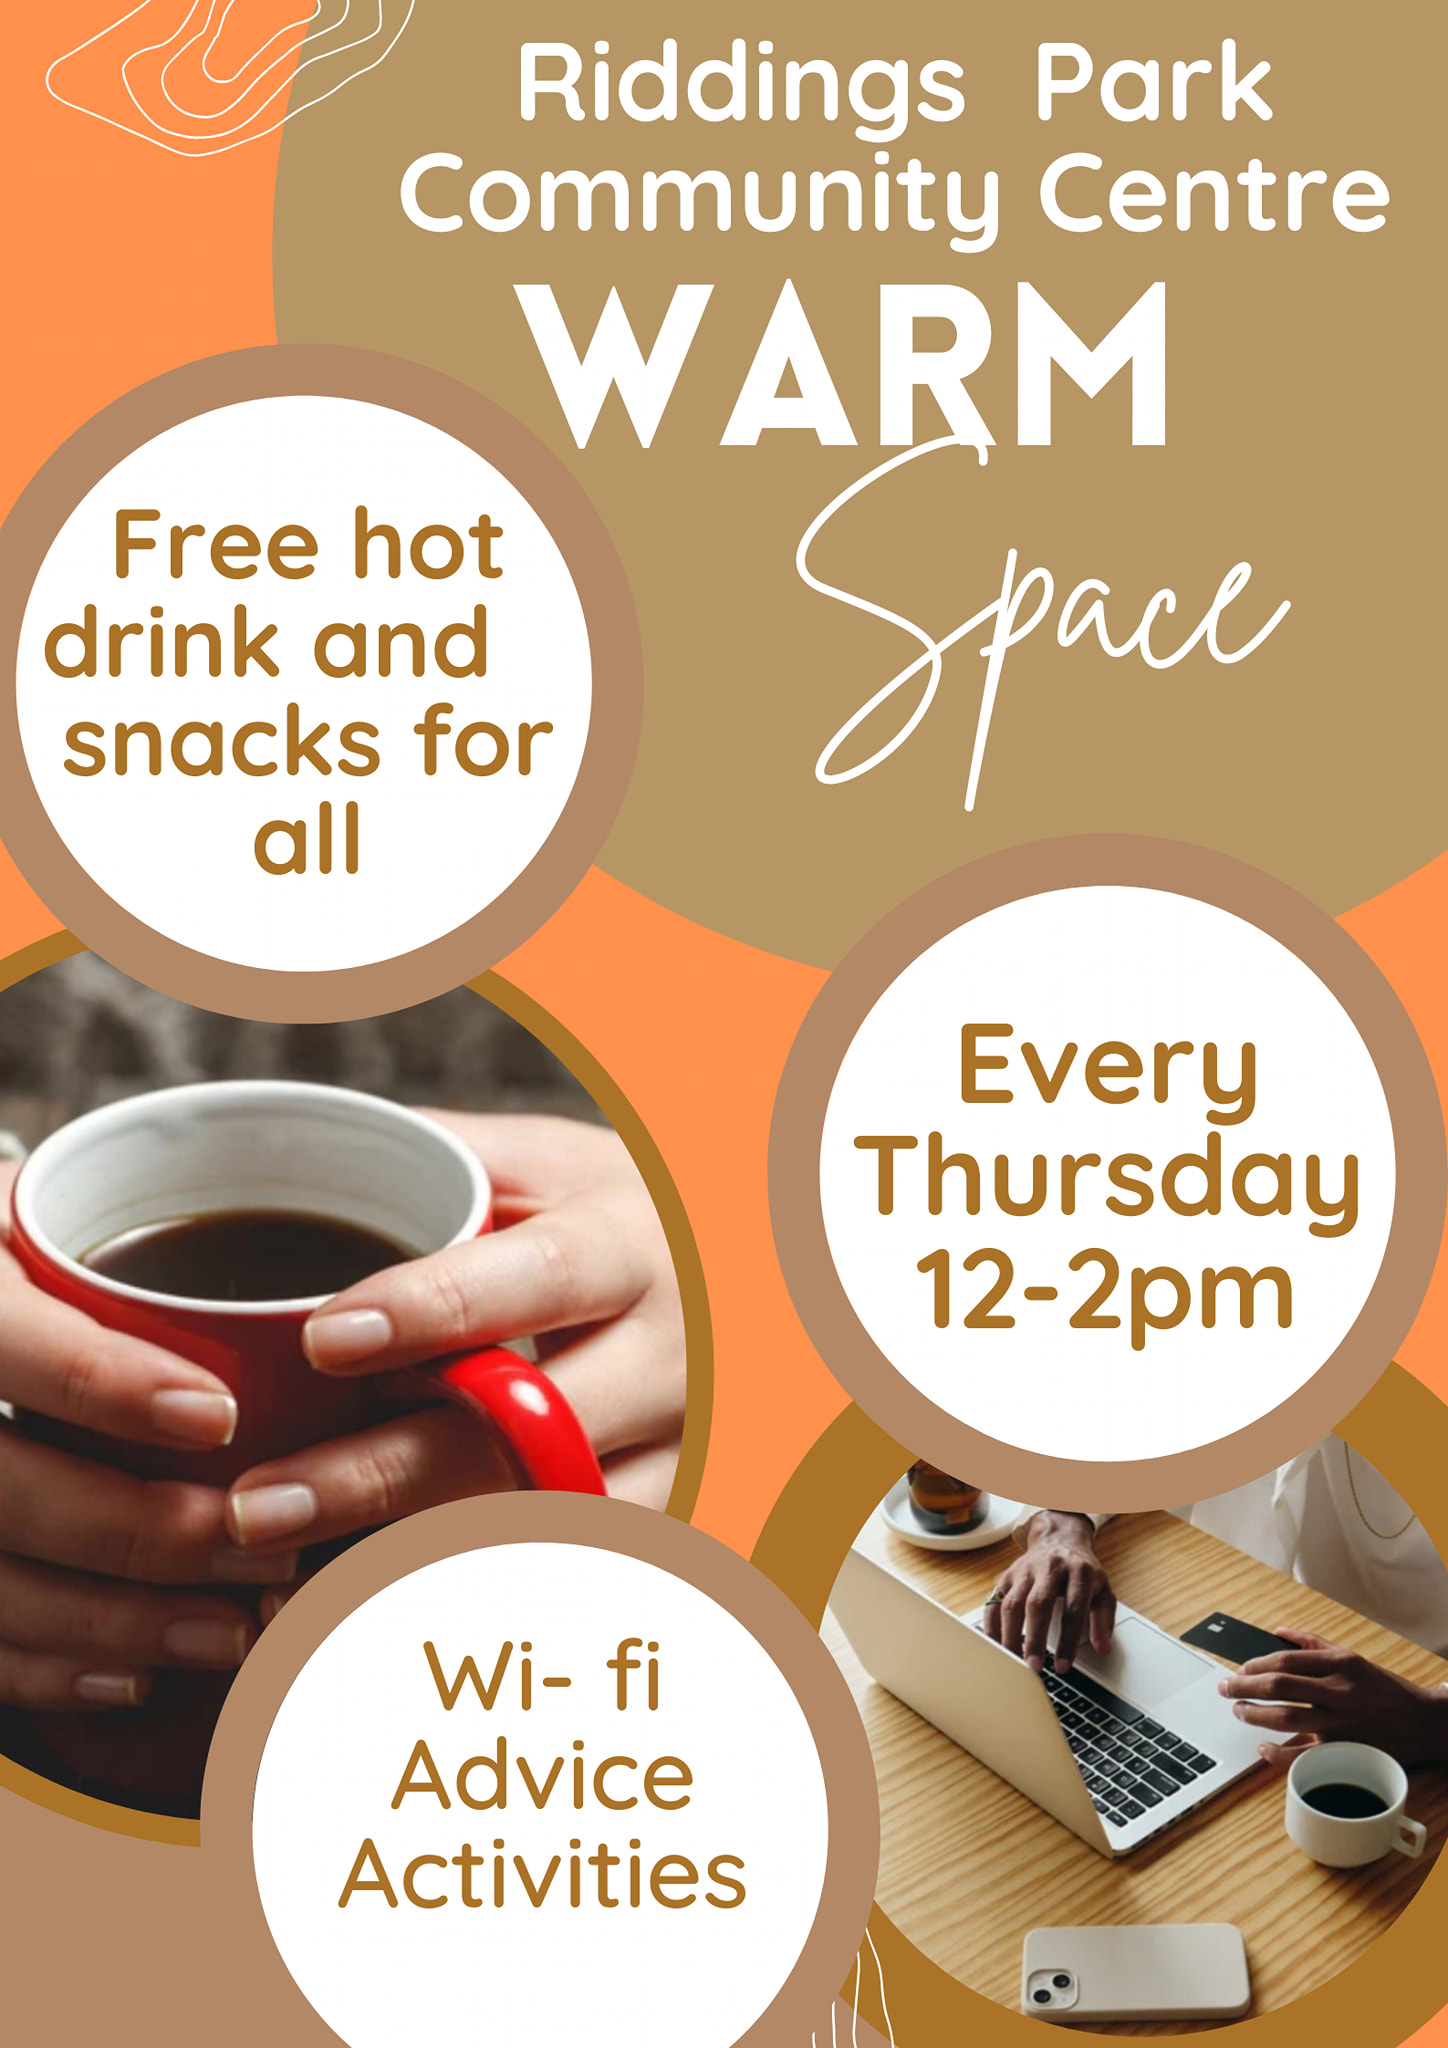 Riddings Park Community Centre will launch its Warm Space on February 2